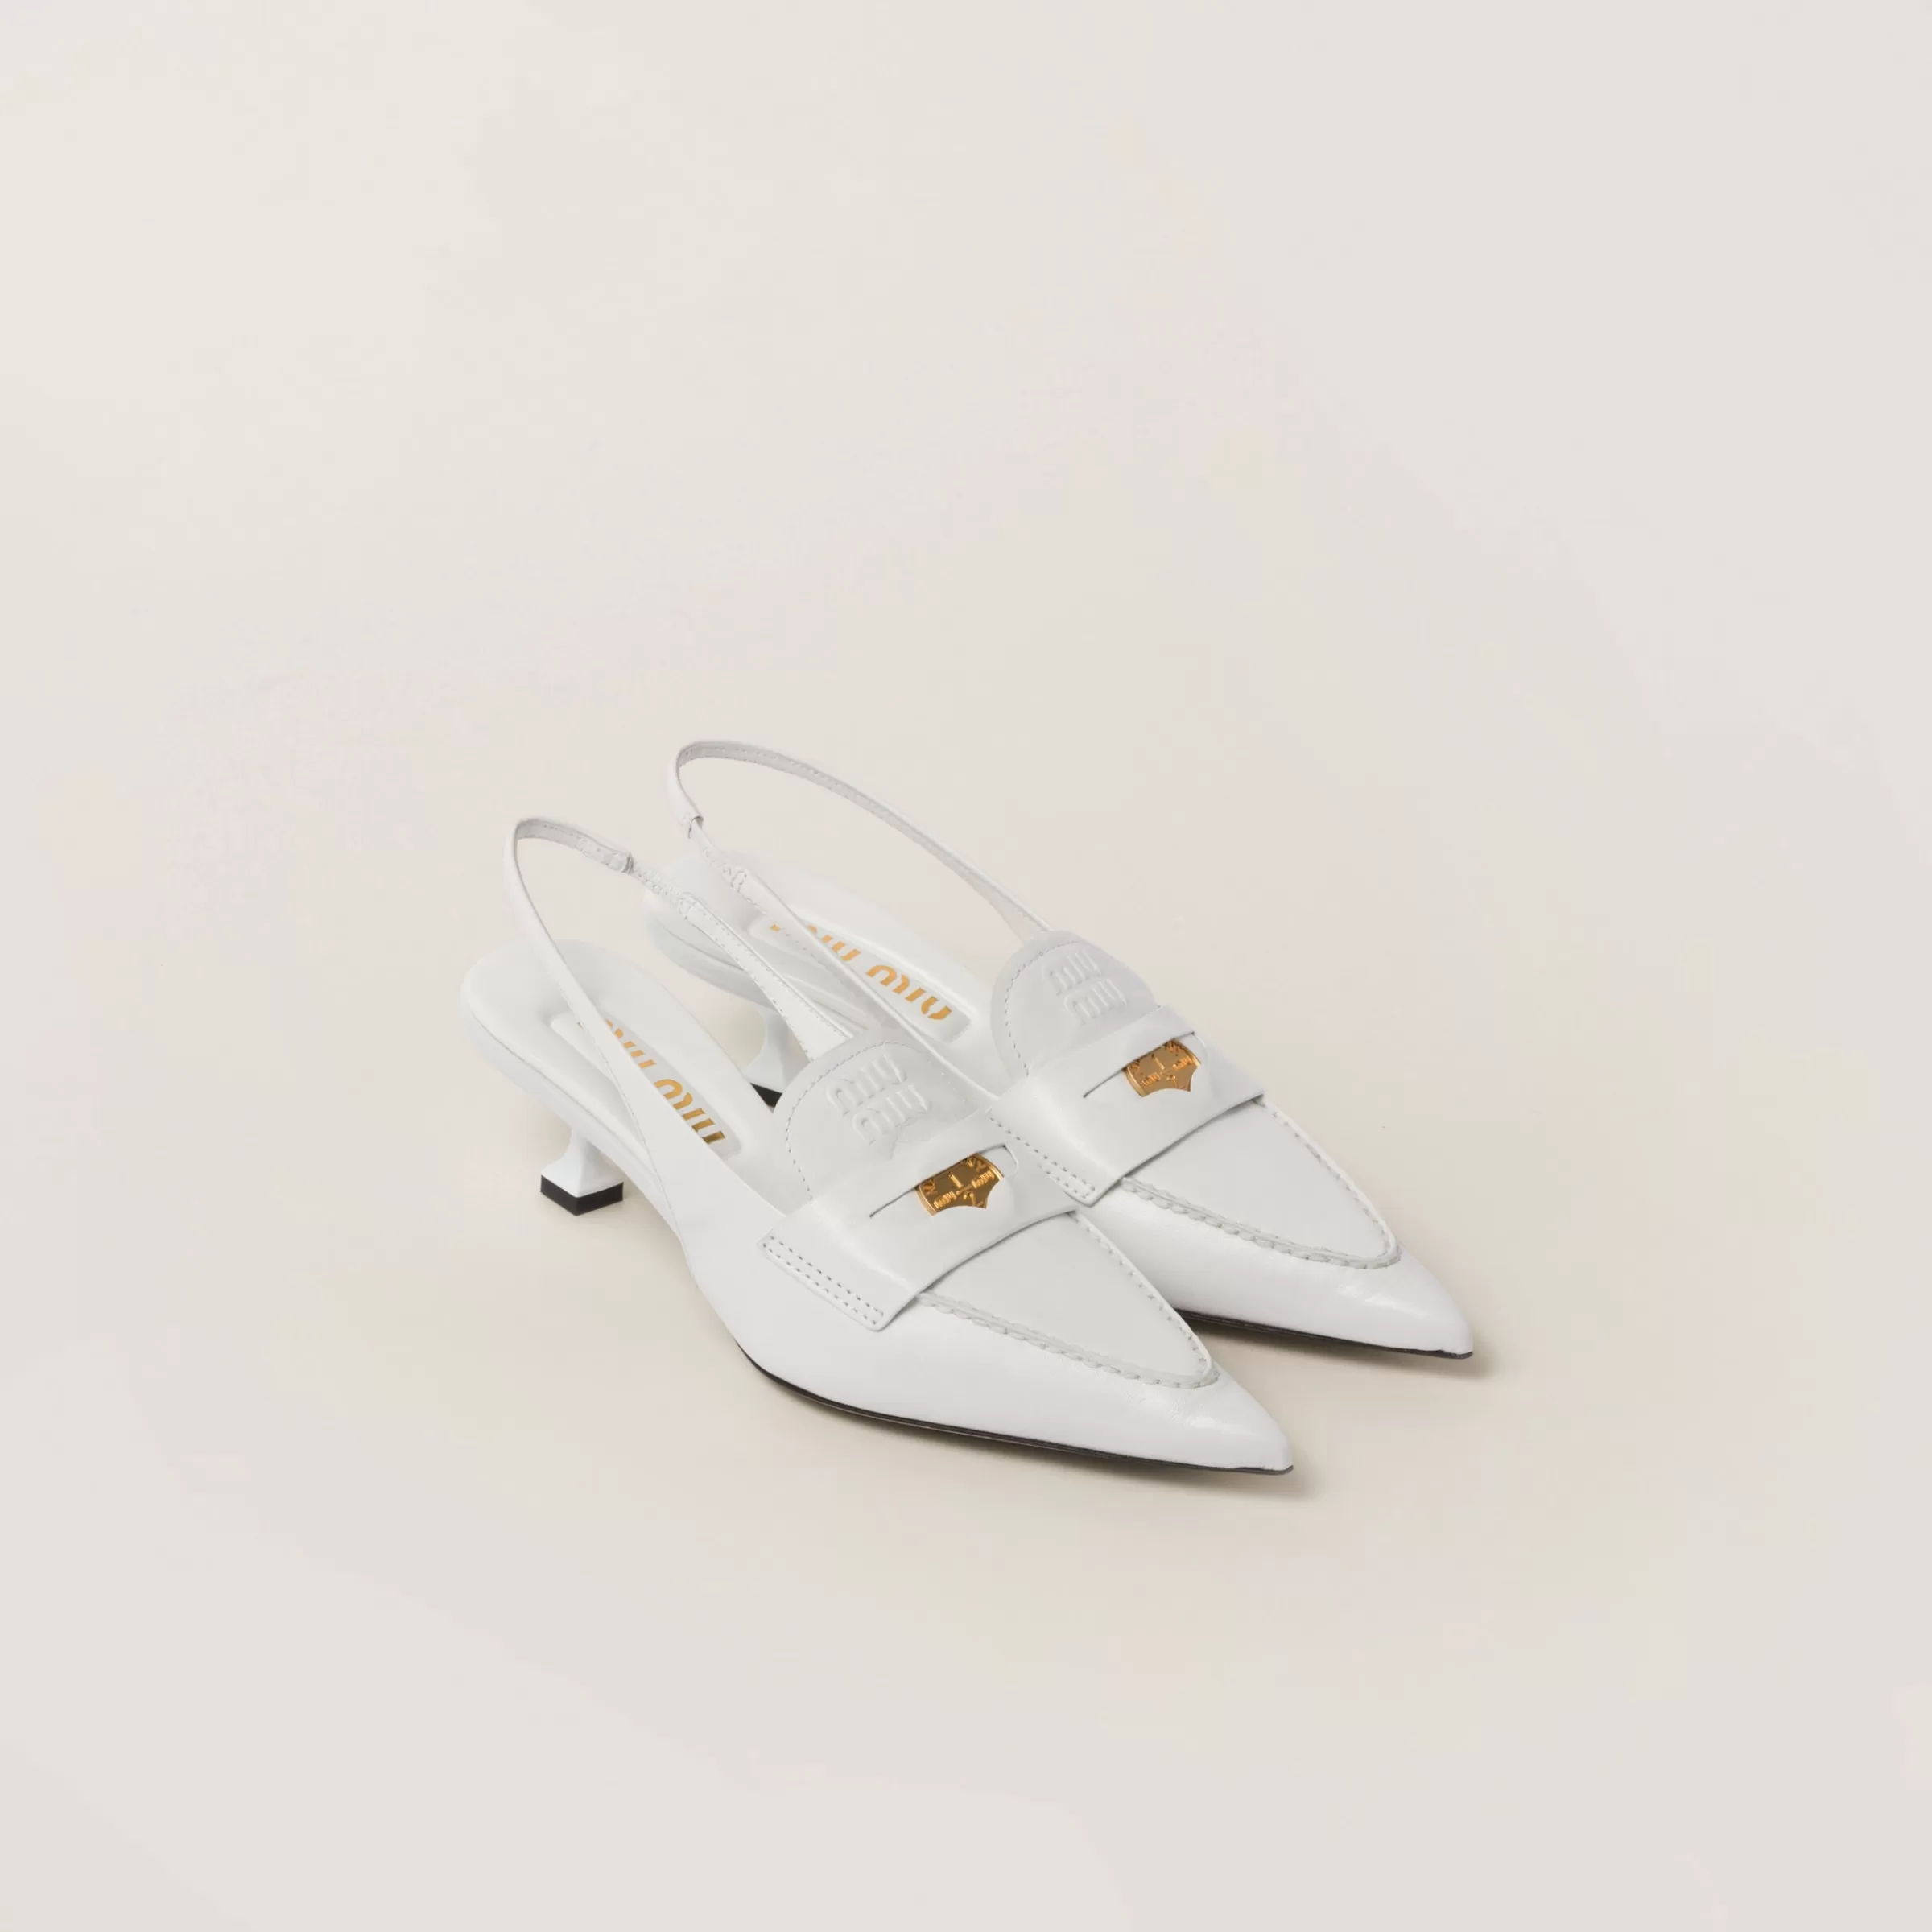 Miu Miu Leather Penny Loafers With Heel |